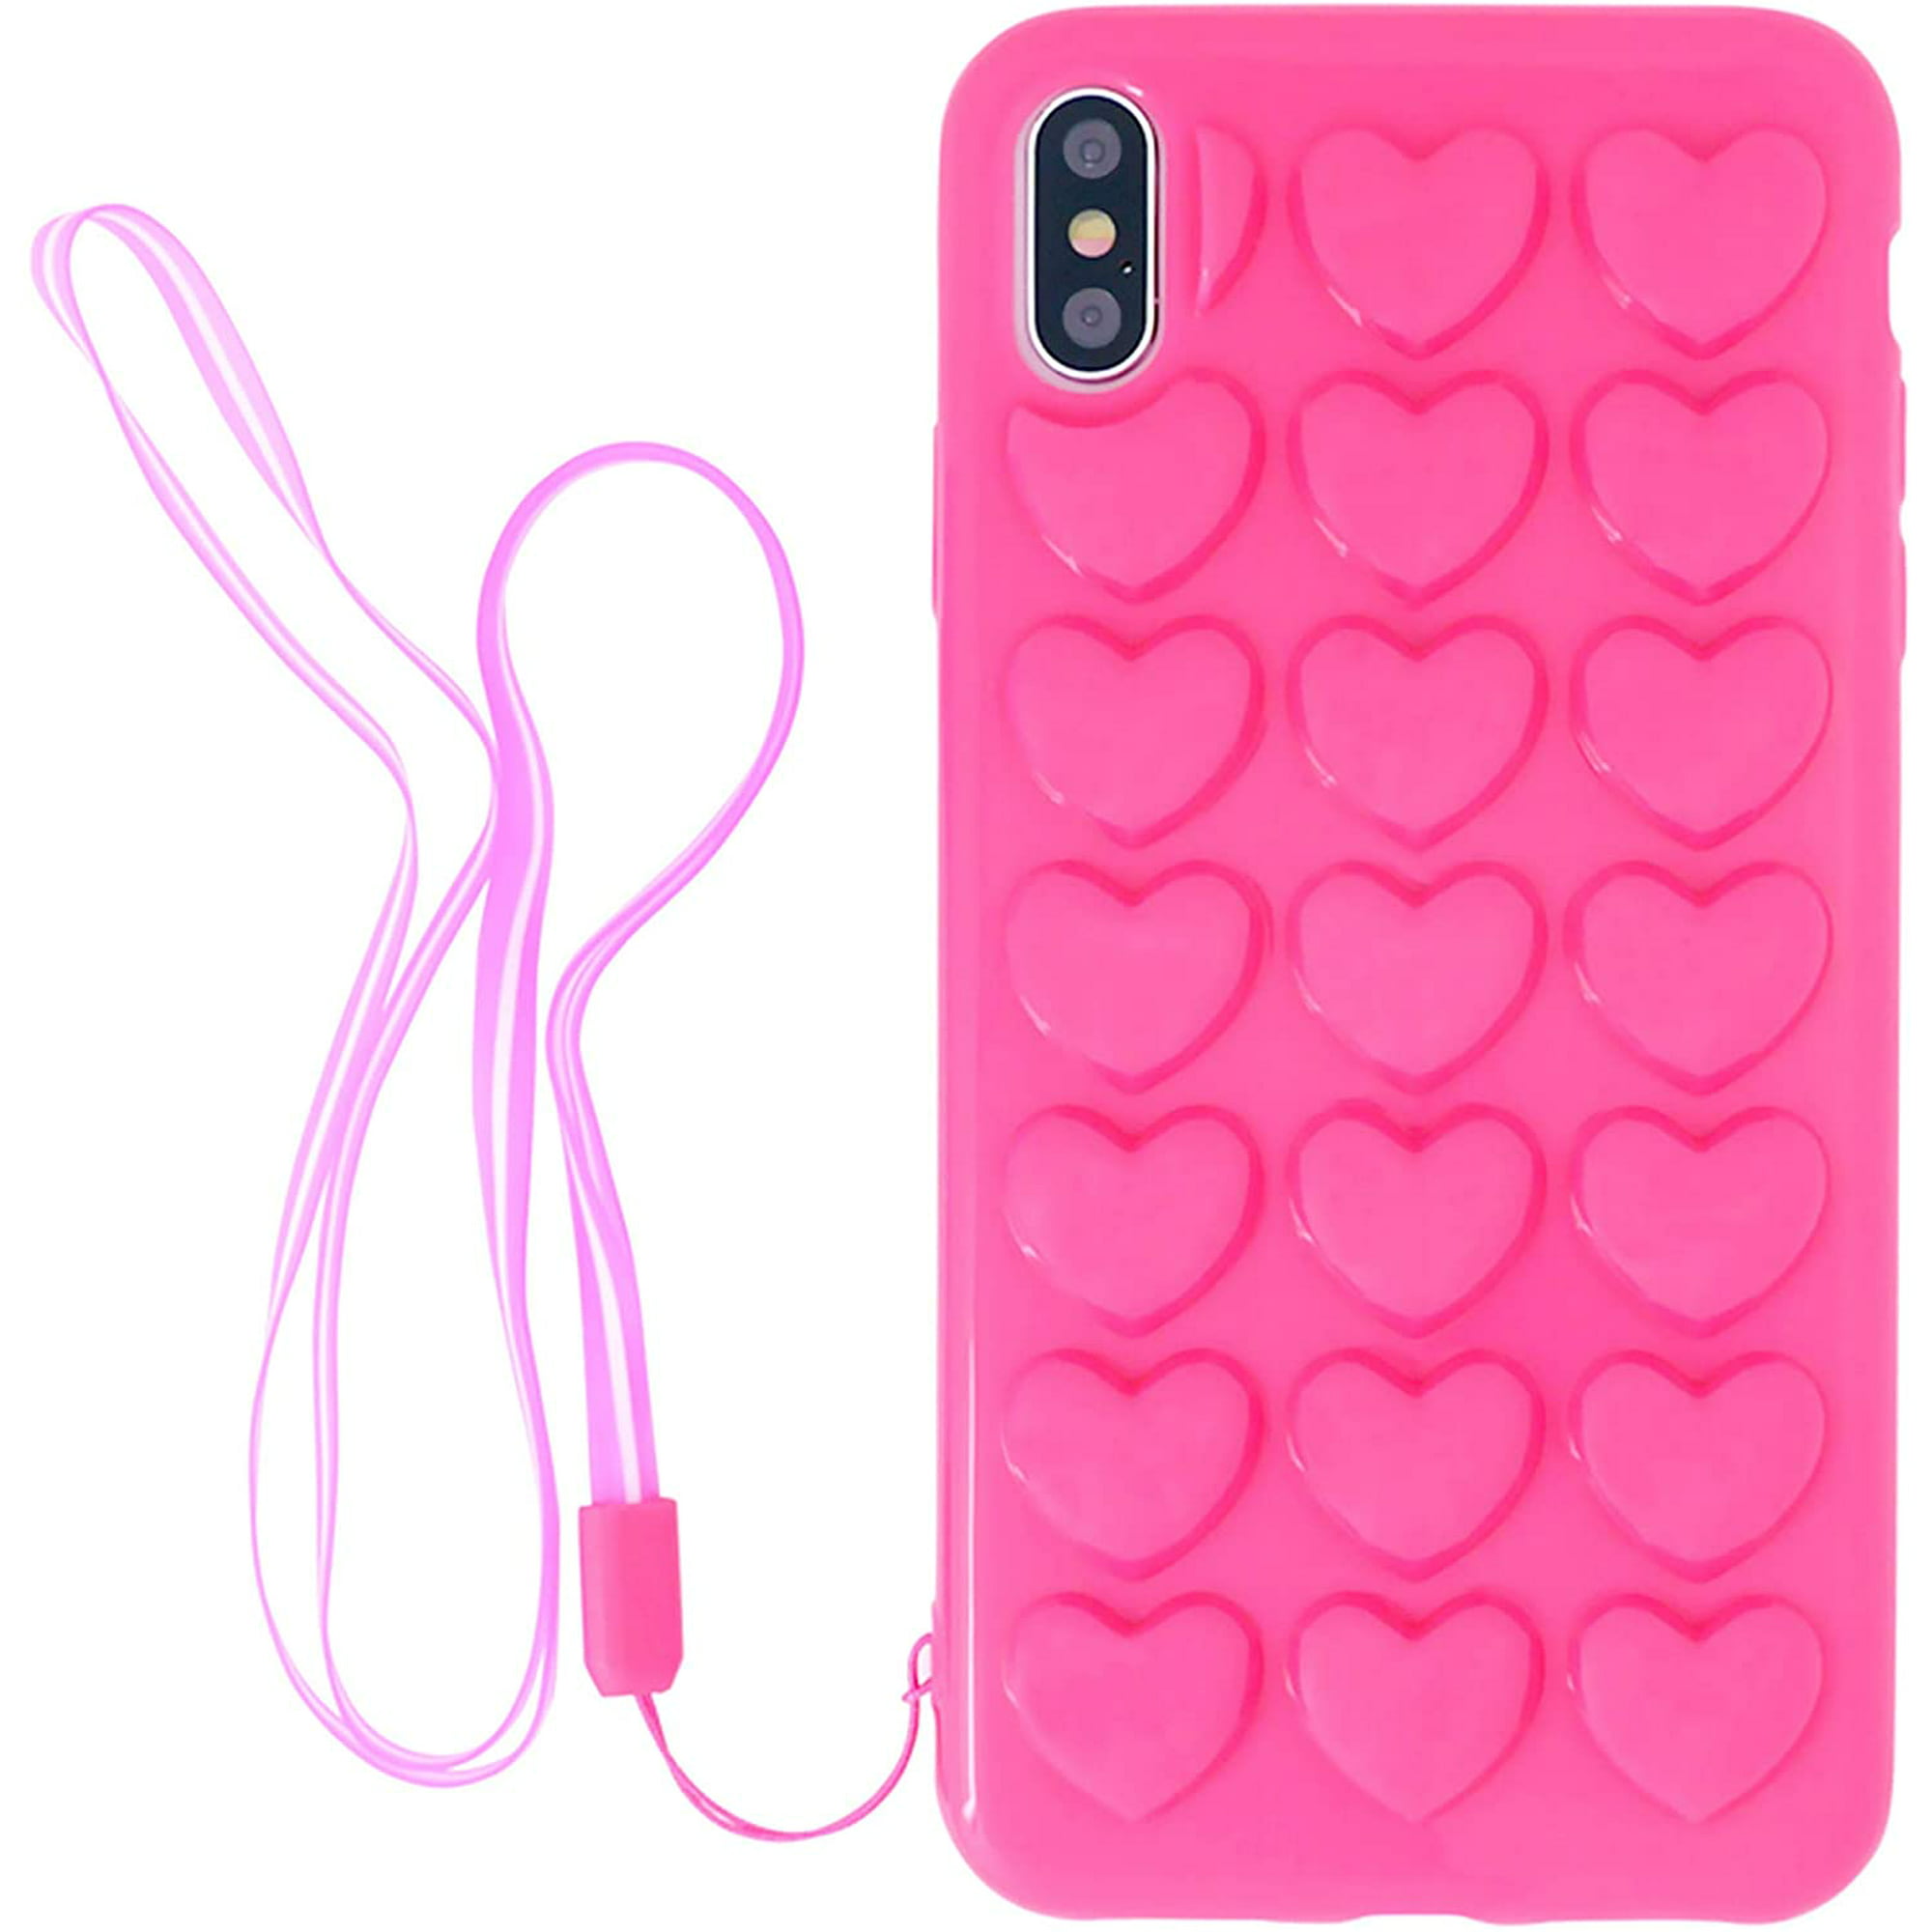 Iphone 6 Plus Iphone 6s Plus Case For Women Dmaos 3d Pop Bubble Heart Cover With Lanyard Wrist Strap Cute Girly Walmart Canada